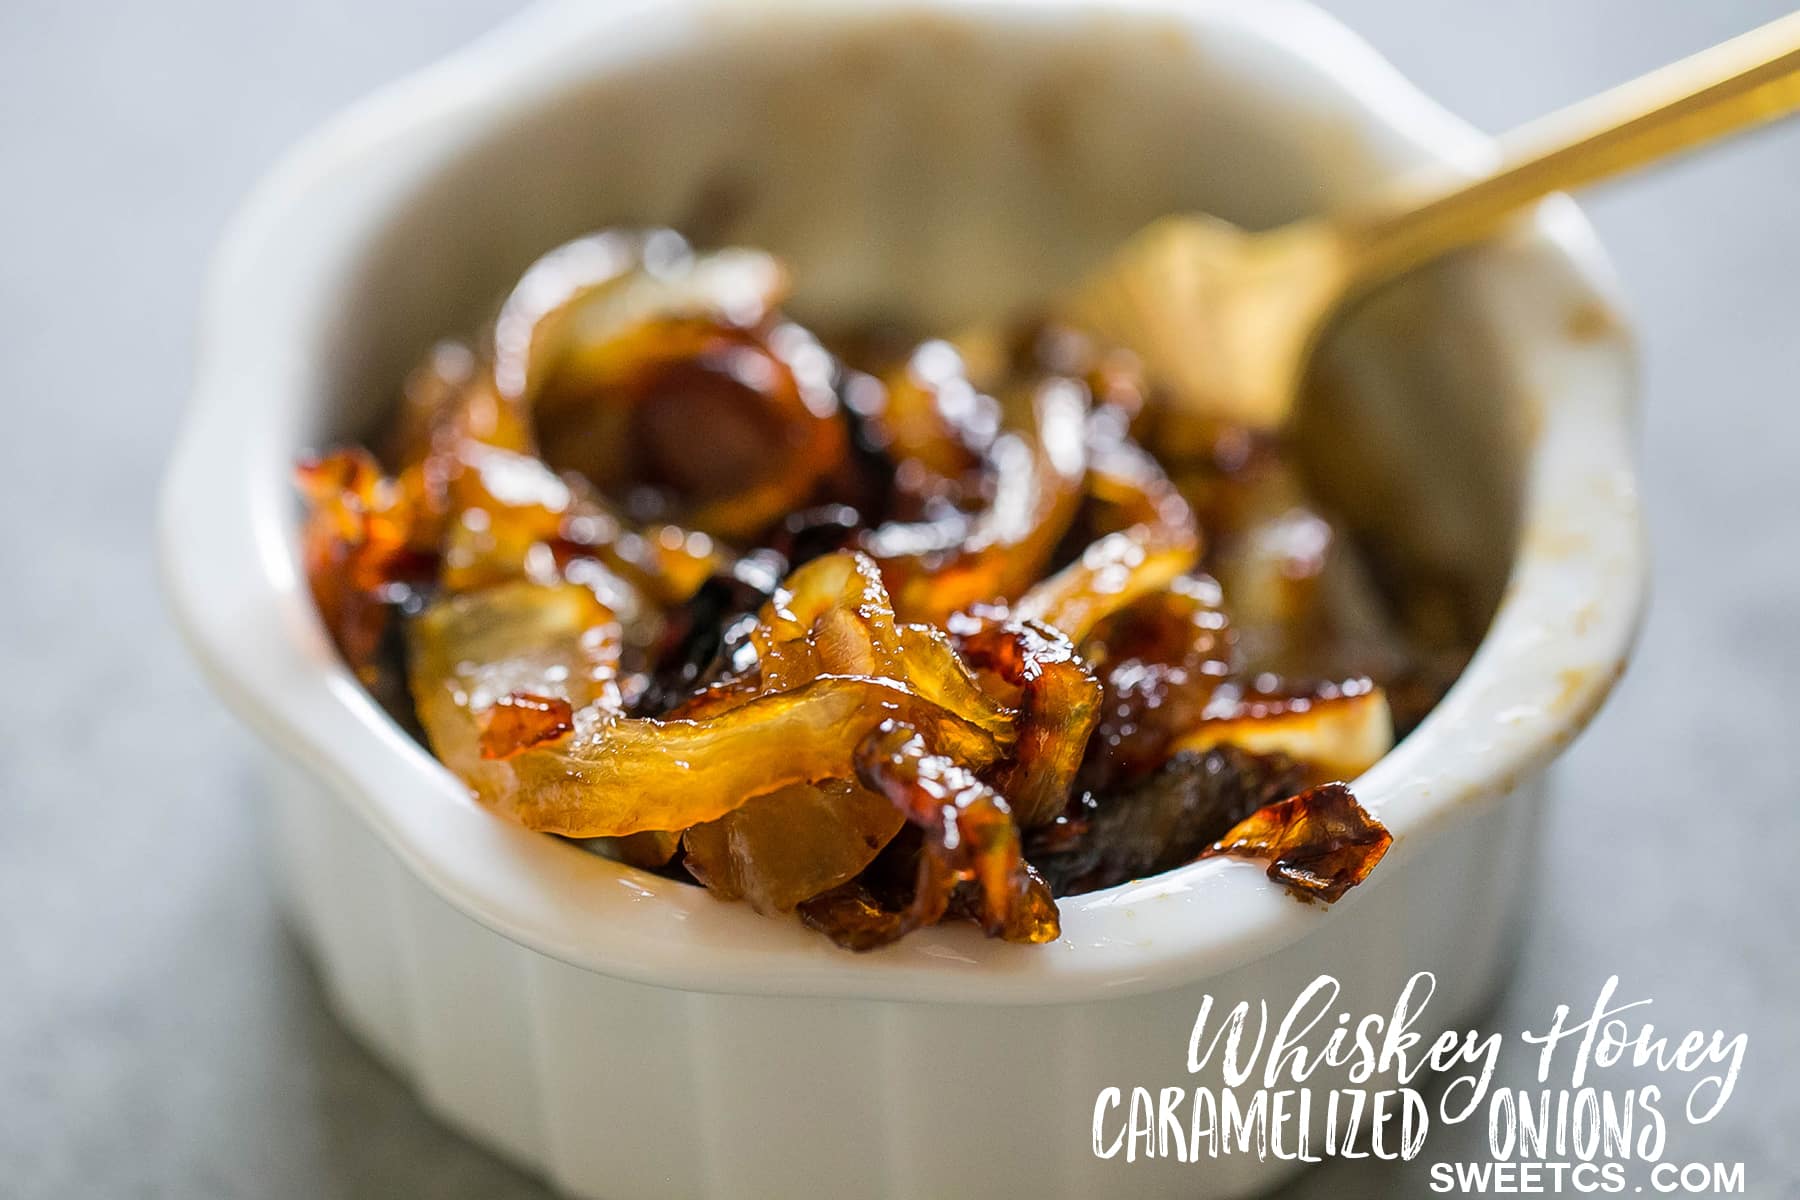 These are THE BEST caramelized onions ever - smoky, sweet and so addictive!